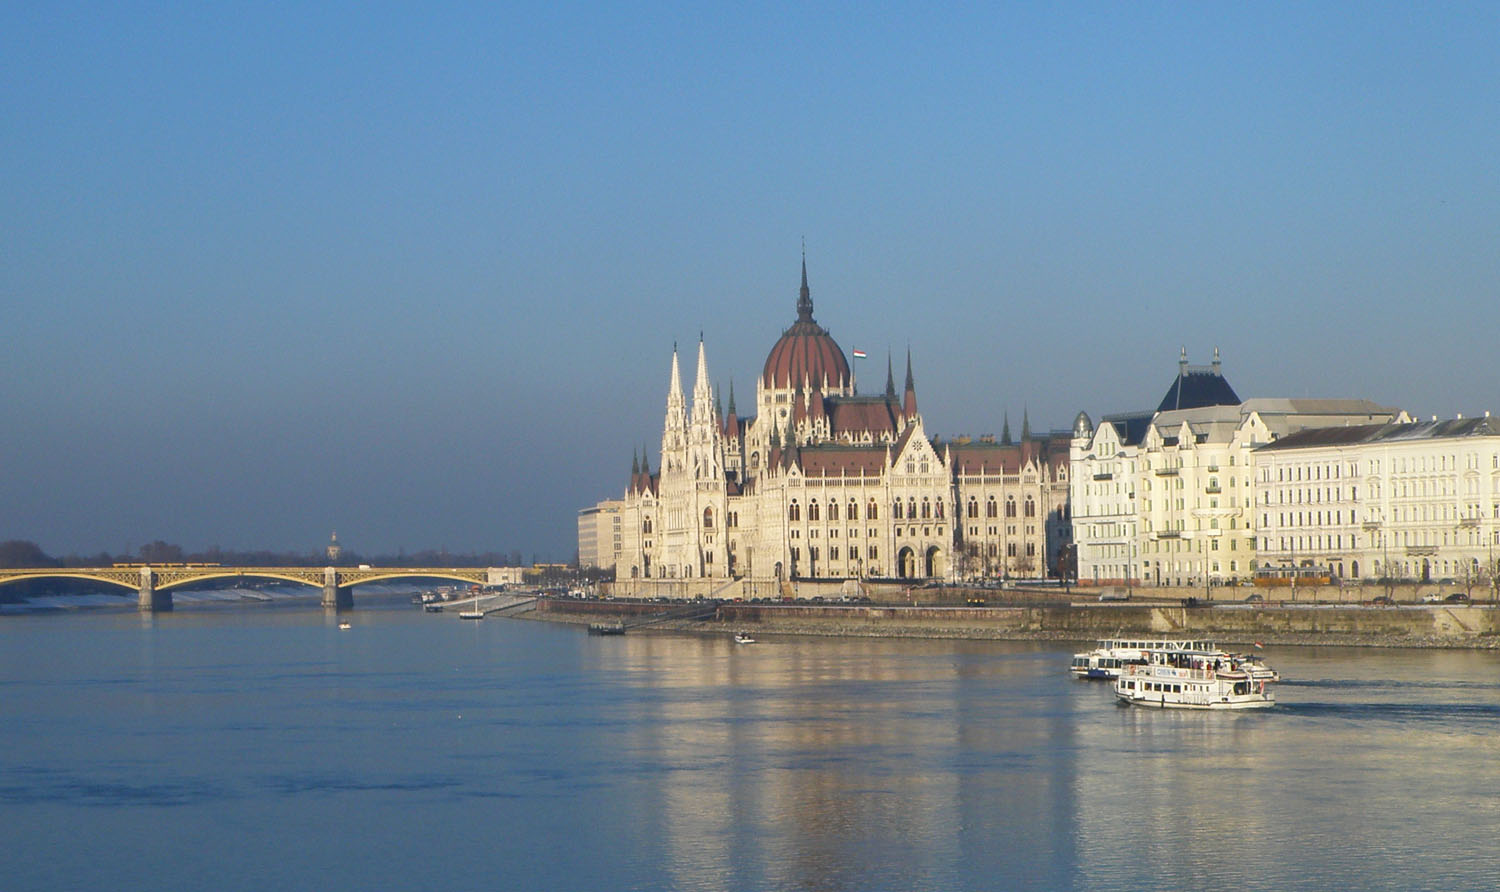 Shooting winter in Budapest with… a Digicam